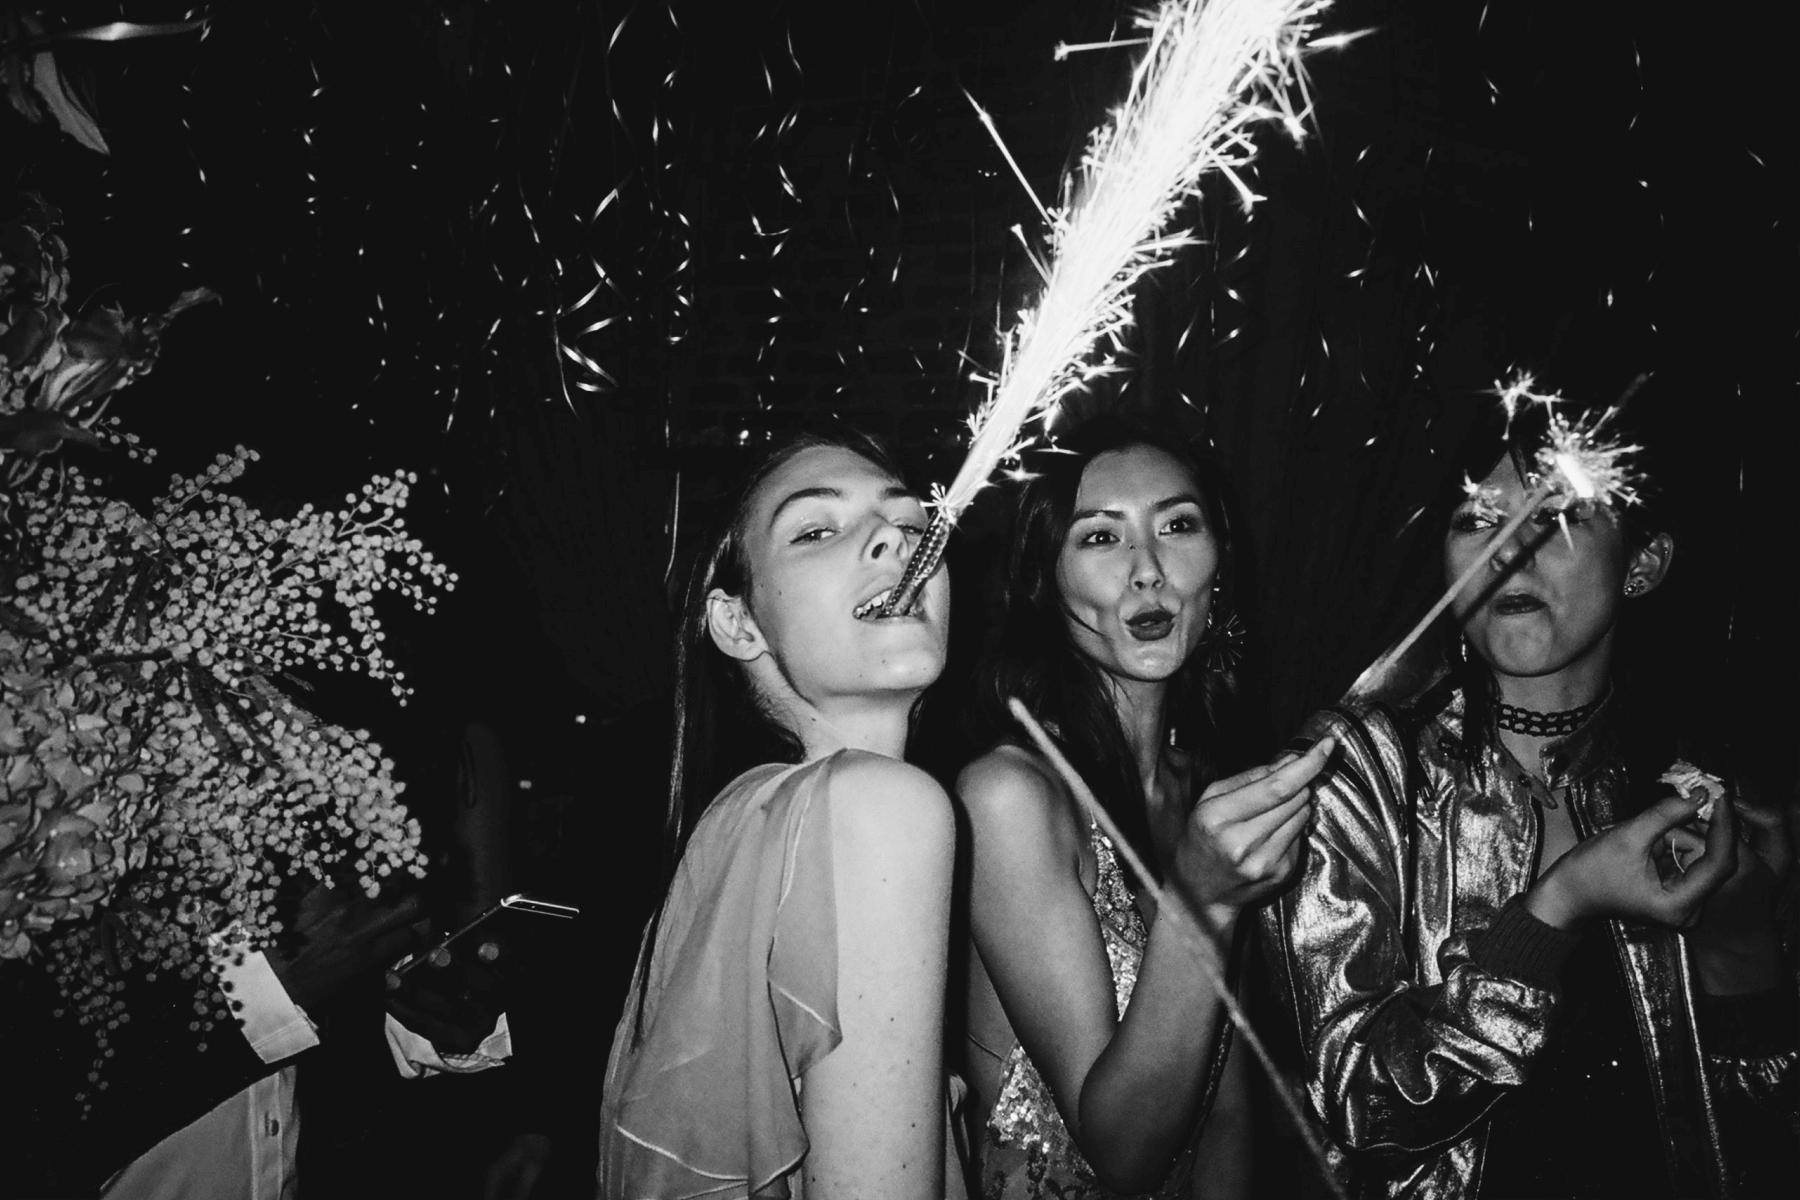 A black and white imsge of three women with celebratory sparklers.